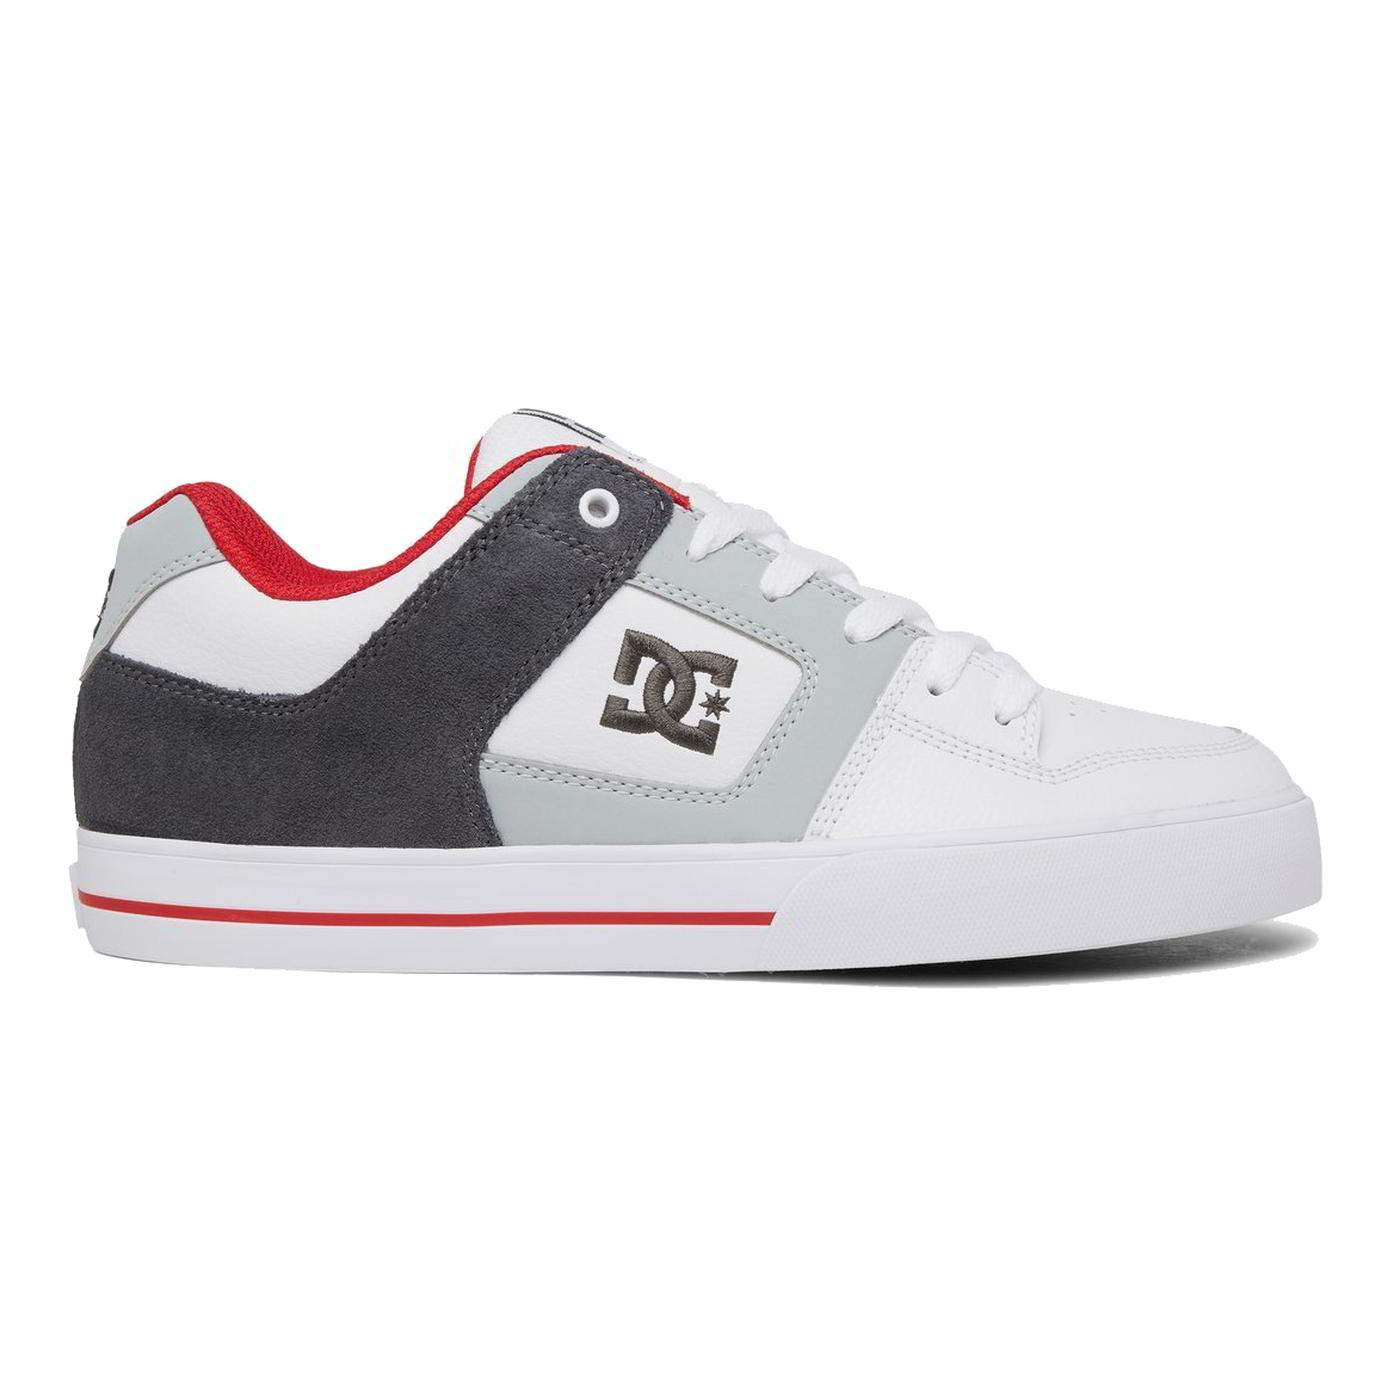 DC Mens Pure Skate Shoes - White Grey Red 2951